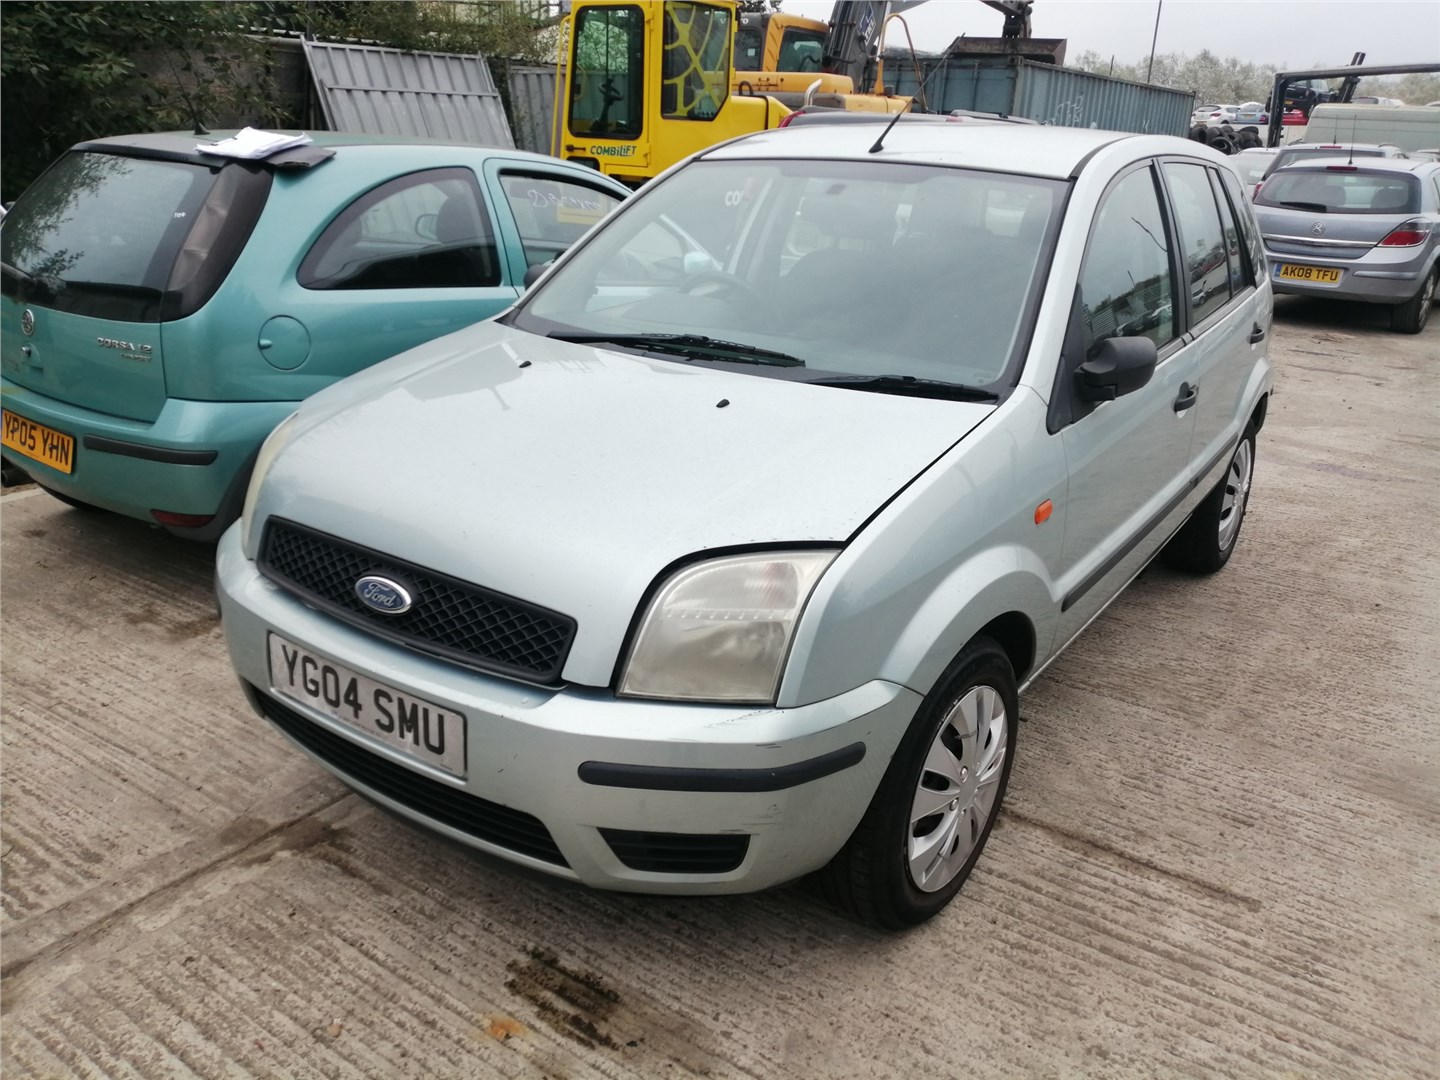 2S6T14A076BA Блок реле Ford Fusion 2002-2012 2004